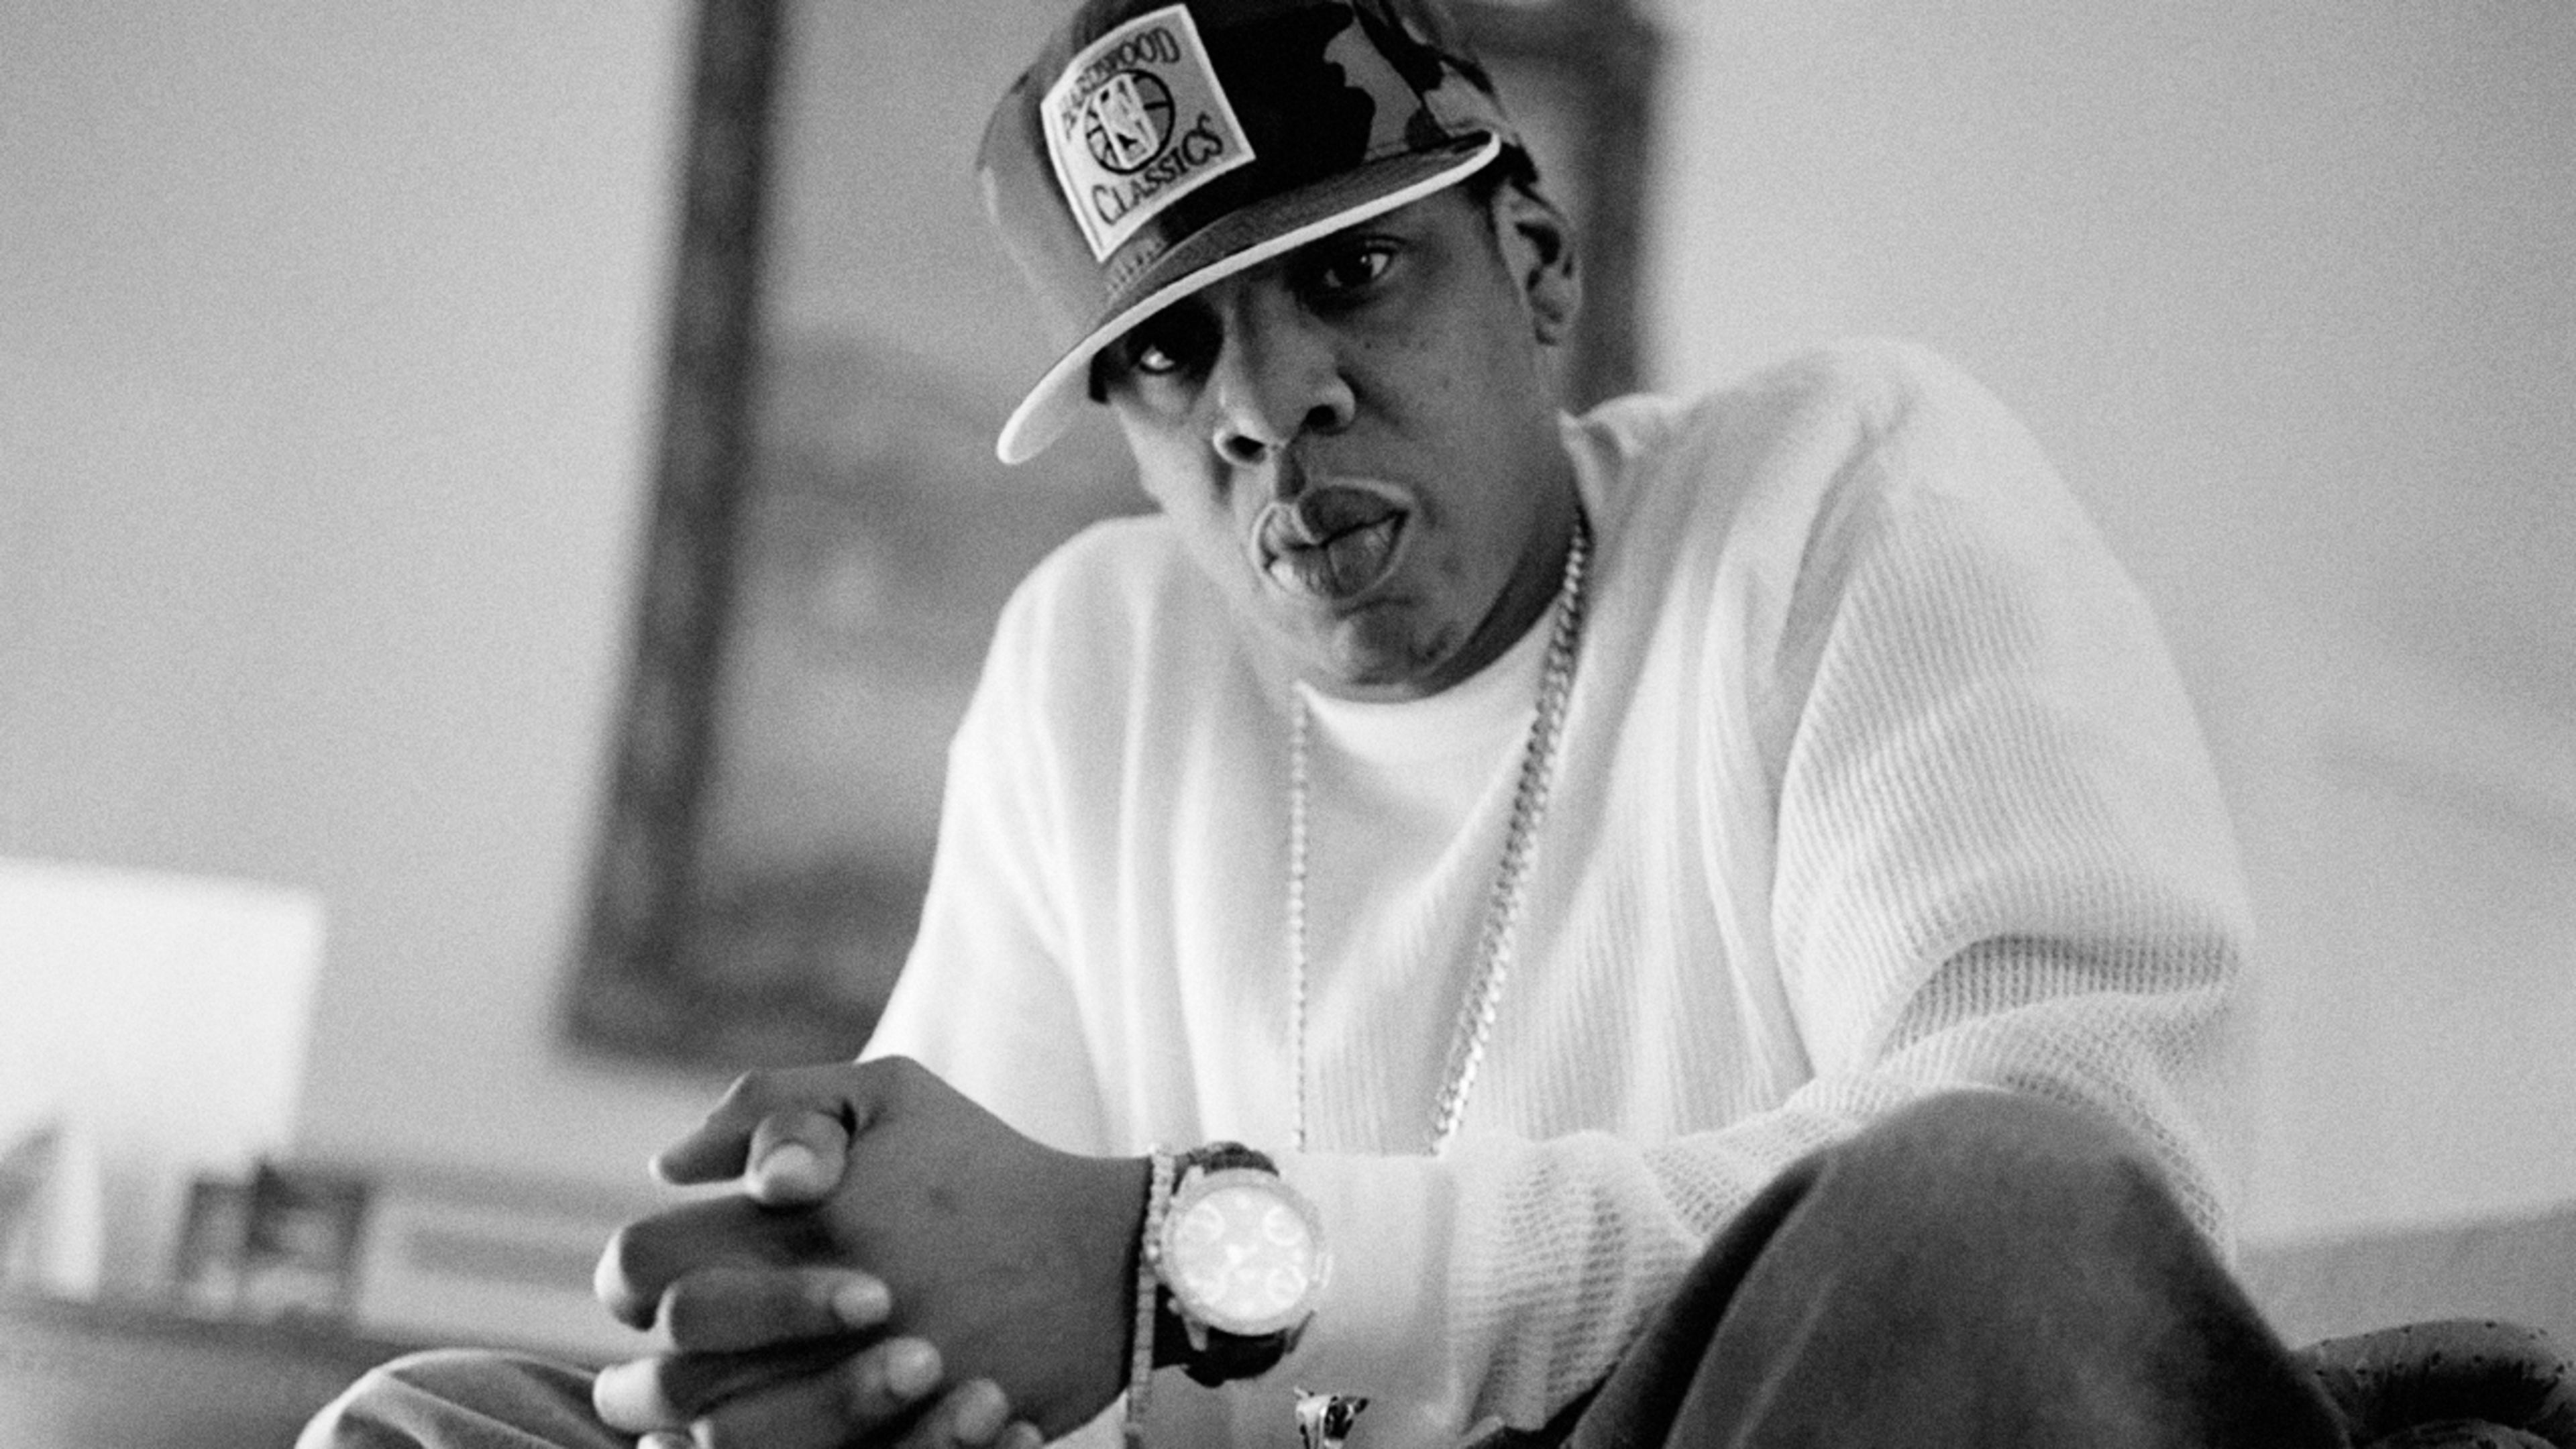 Jay Z is now a billionaire: Here’s how he got there